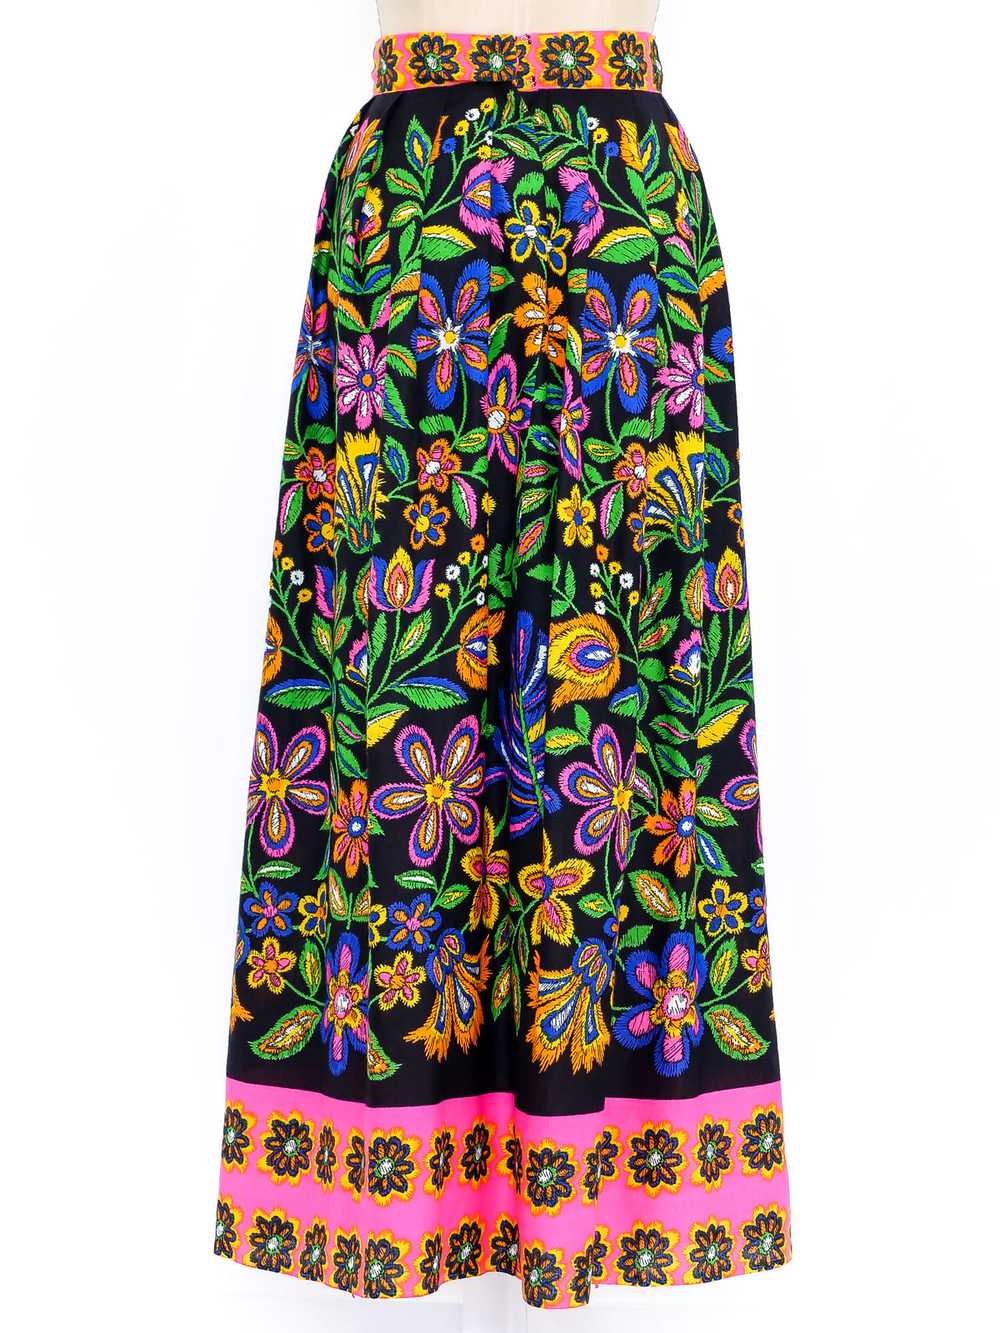 Psychedelic Floral Printed Skirt - image 5